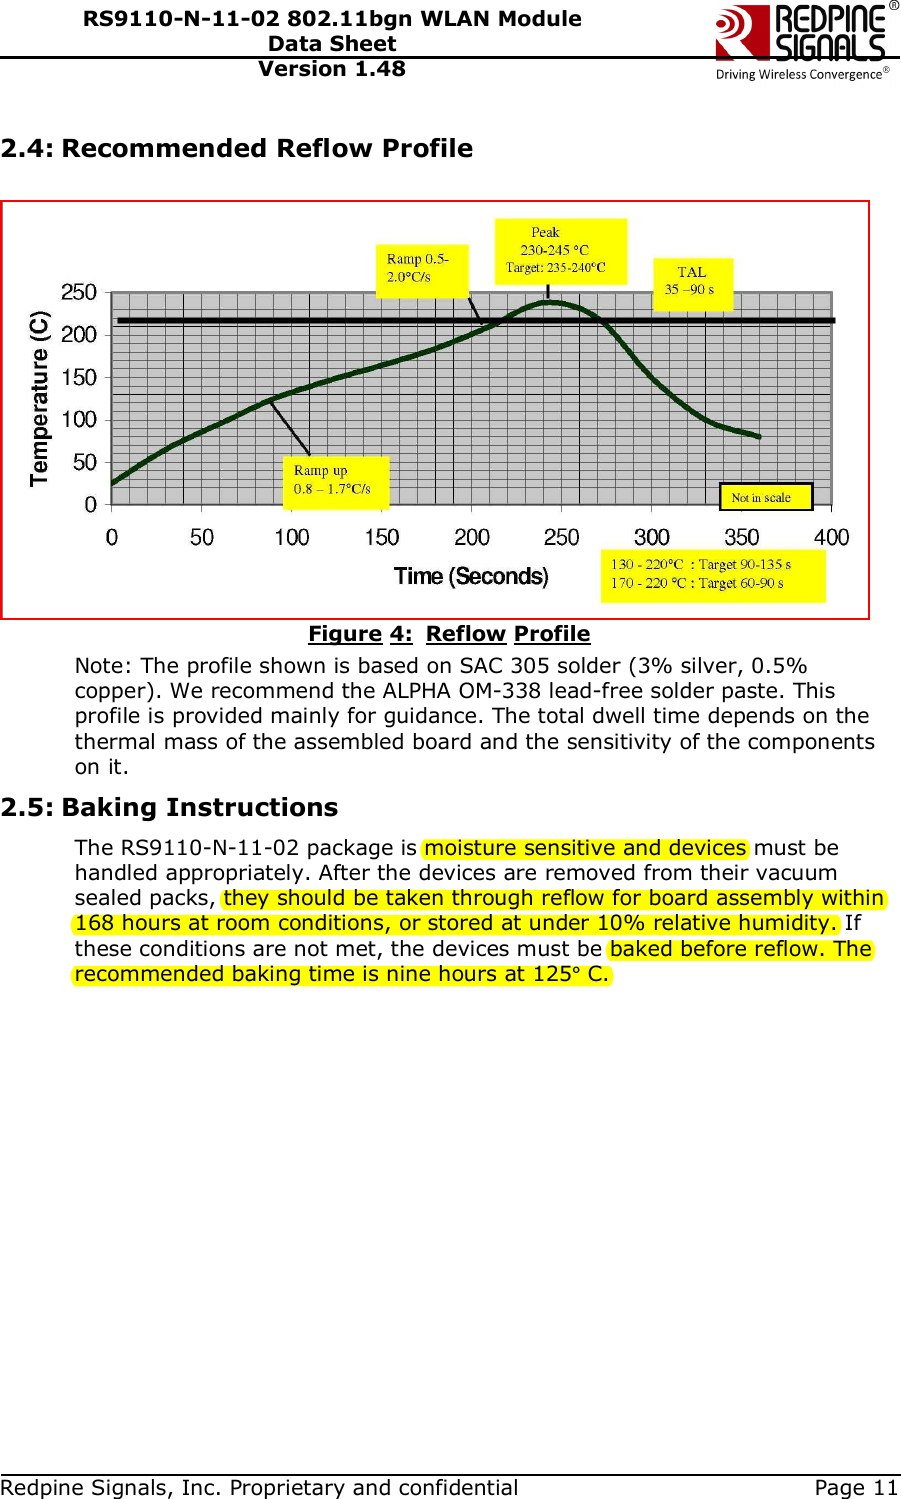   Redpine Signals, Inc. Proprietary and confidential  Page 11 RS9110-N-11-02 802.11bgn WLAN Module Data Sheet Version 1.48 2.4: Recommended Reflow Profile   Figure 4:  Reflow Profile Note: The profile shown is based on SAC 305 solder (3% silver, 0.5% copper). We recommend the ALPHA OM-338 lead-free solder paste. This profile is provided mainly for guidance. The total dwell time depends on the thermal mass of the assembled board and the sensitivity of the components on it.  2.5: Baking Instructions The RS9110-N-11-02 package is moisture sensitive and devices must be handled appropriately. After the devices are removed from their vacuum sealed packs, they should be taken through reflow for board assembly within 168 hours at room conditions, or stored at under 10% relative humidity. If these conditions are not met, the devices must be baked before reflow. The recommended baking time is nine hours at 125° C.  